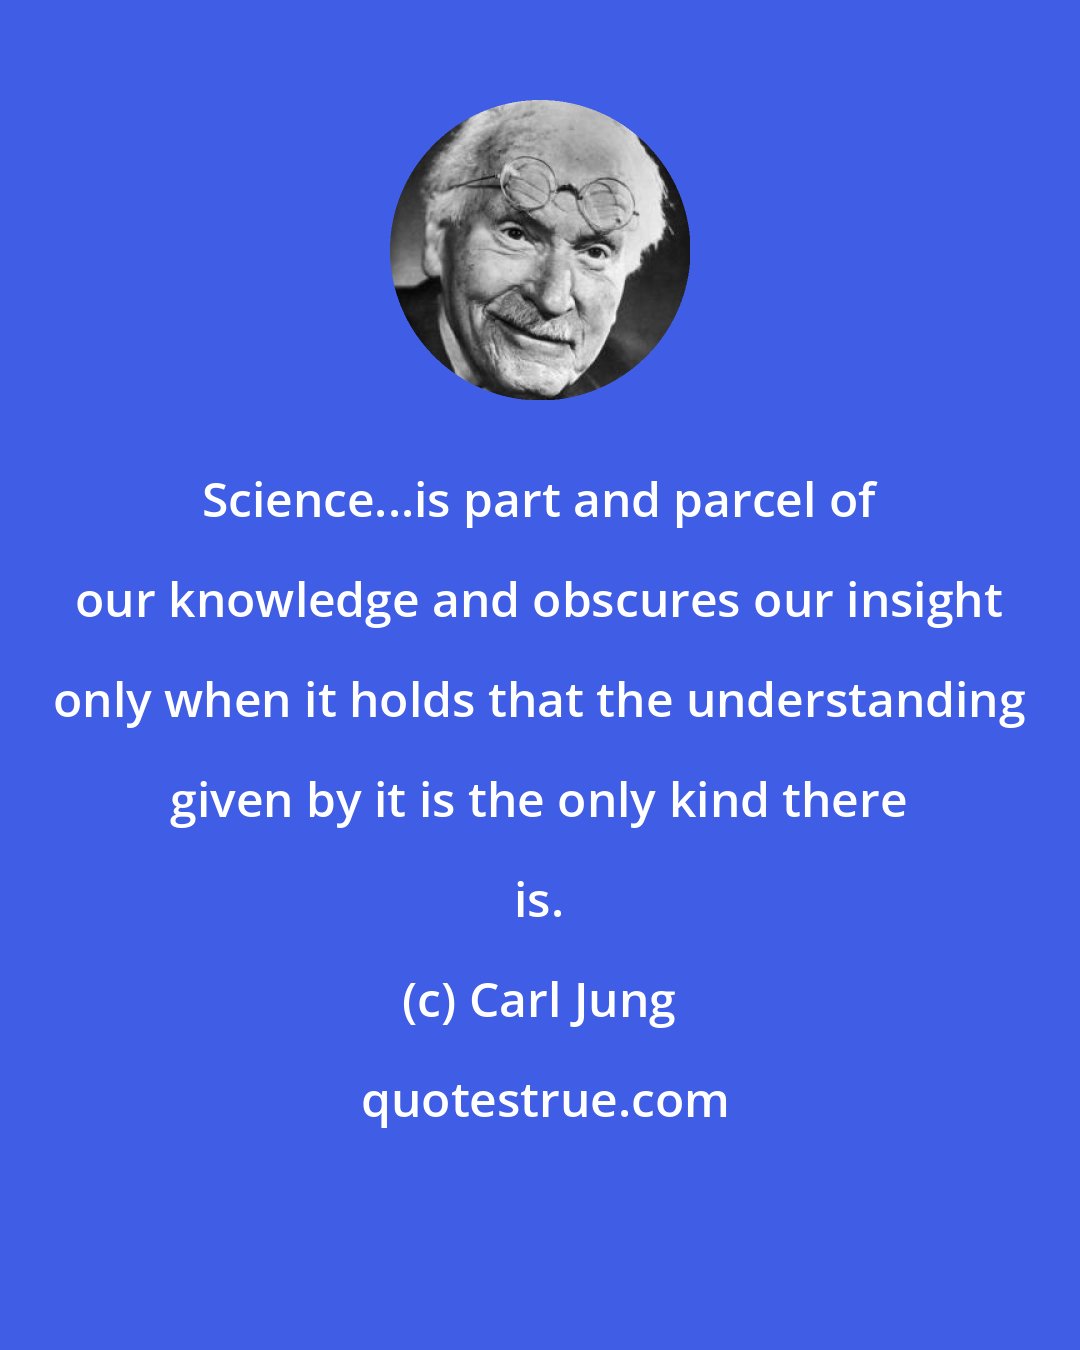 Carl Jung: Science...is part and parcel of our knowledge and obscures our insight only when it holds that the understanding given by it is the only kind there is.